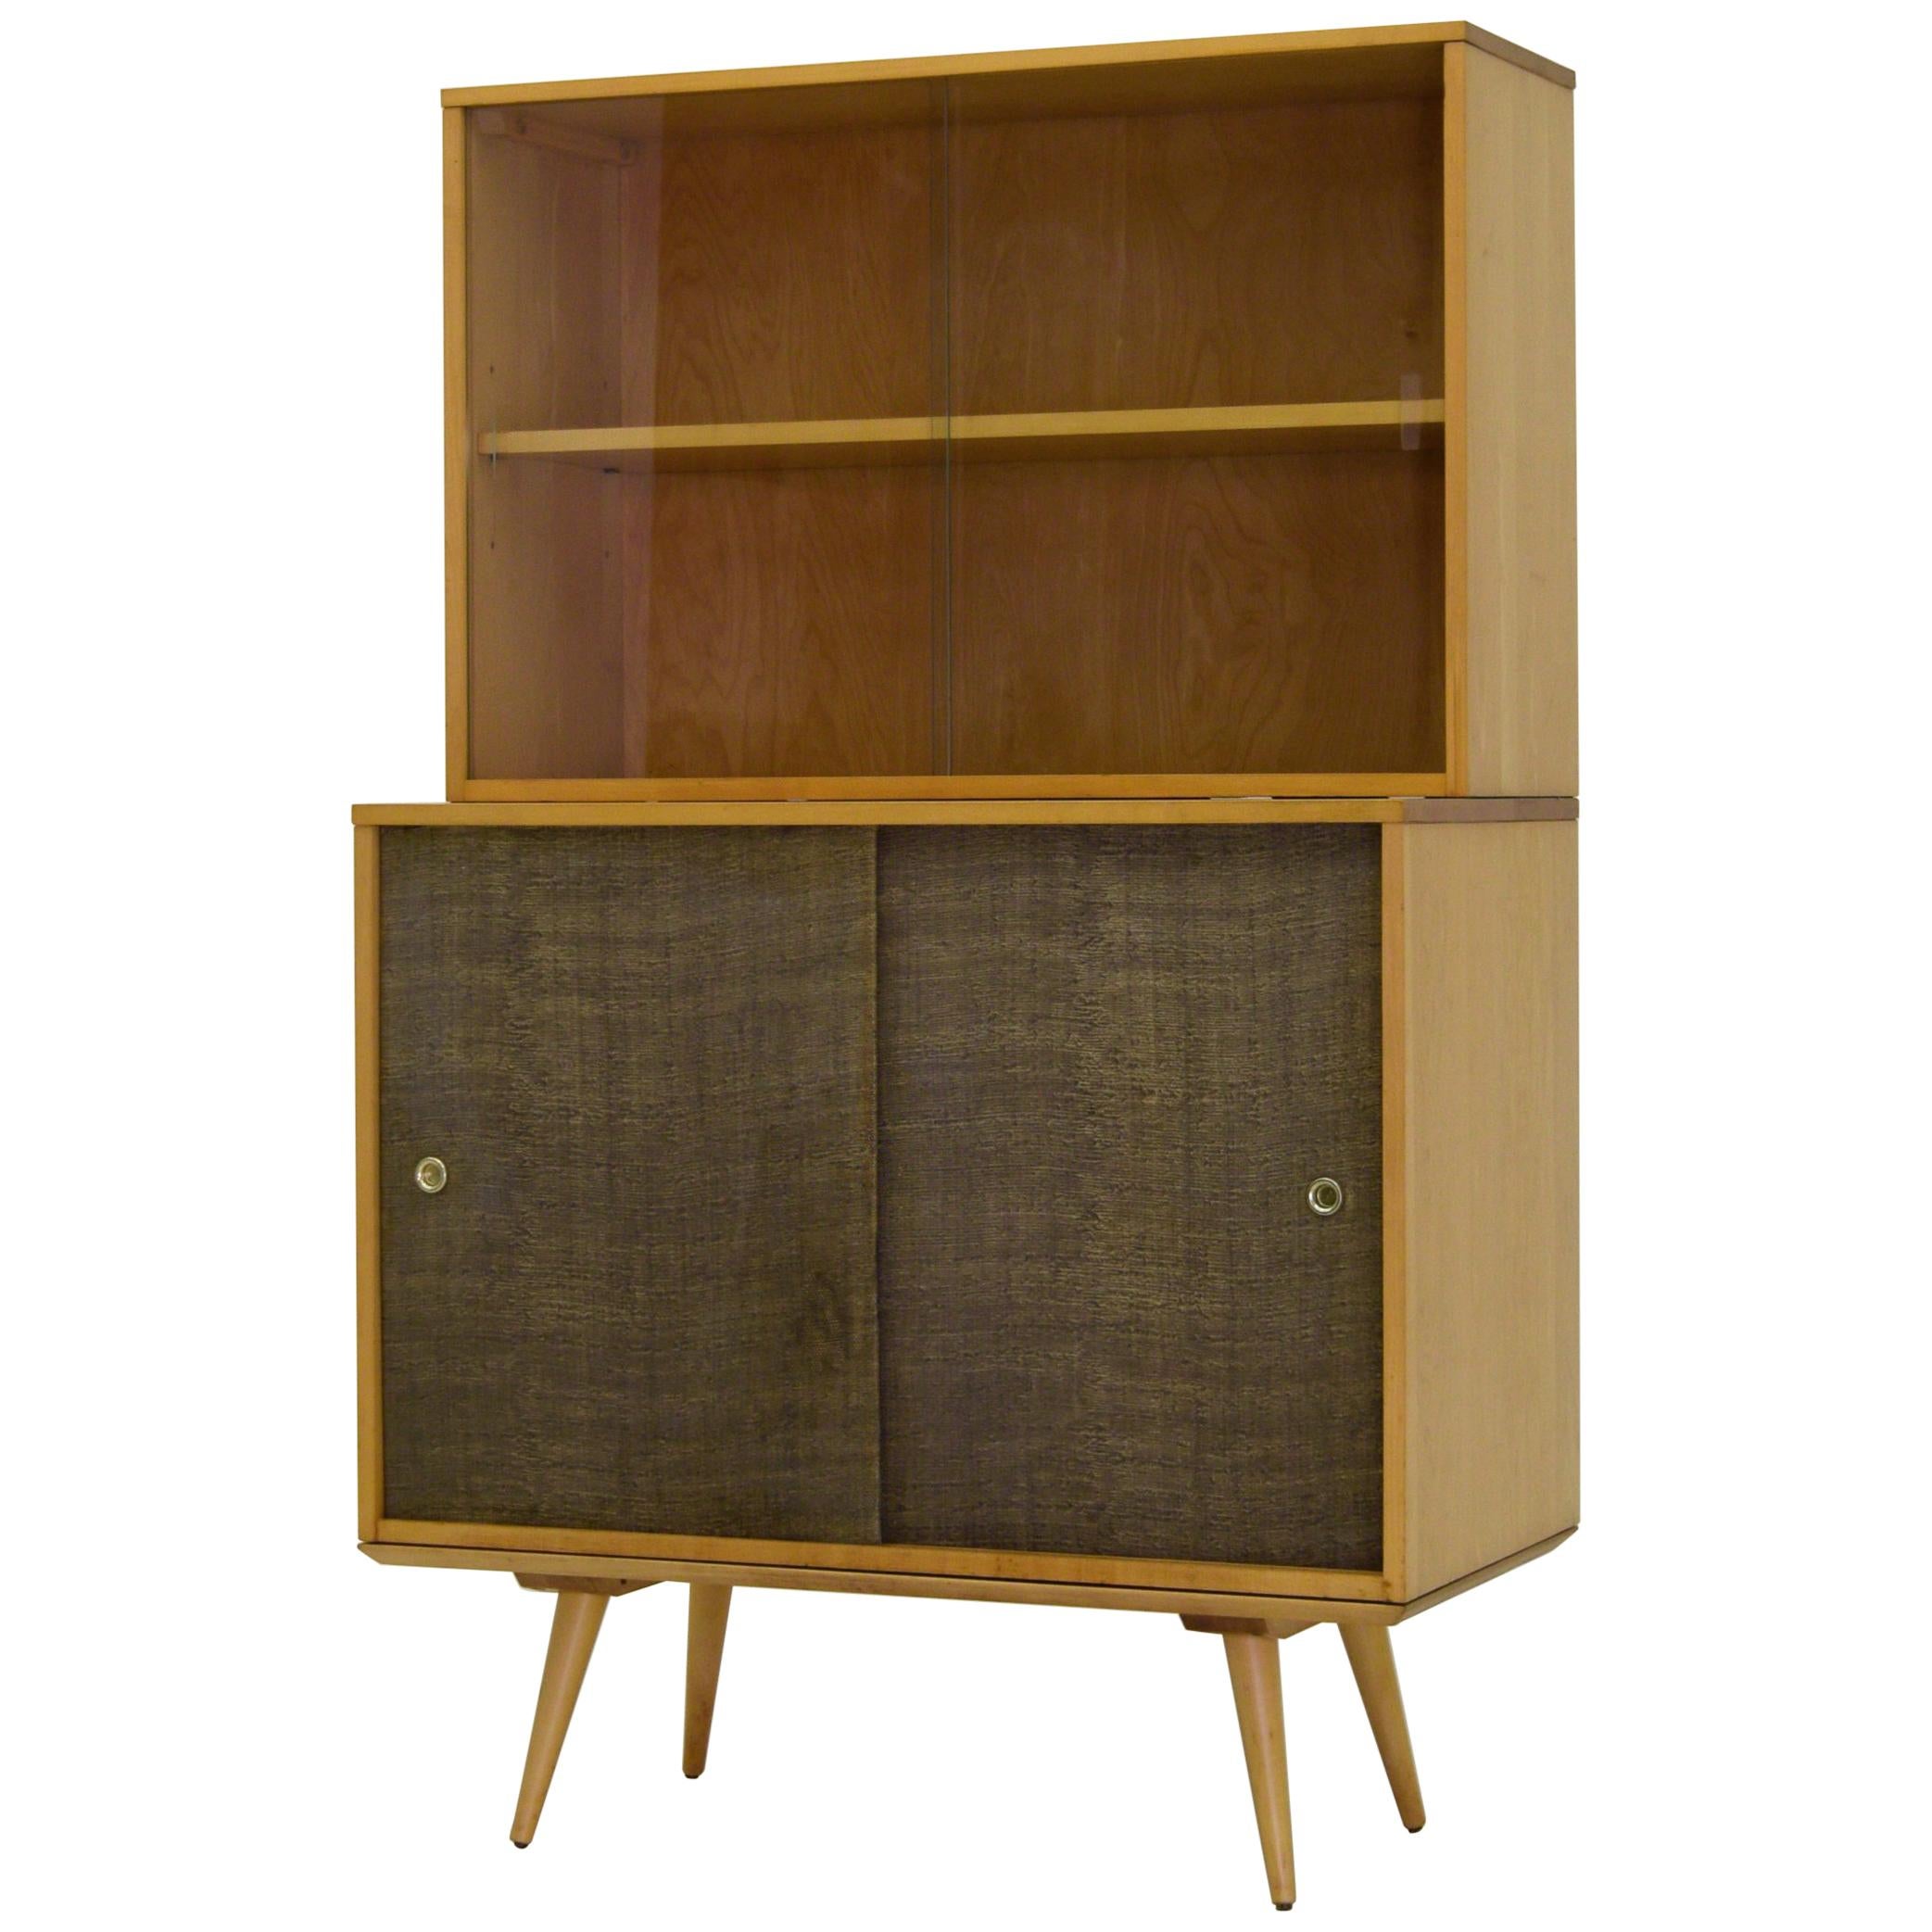 3 Piece Petite Modular Upright or Cabinet by Paul McCobb